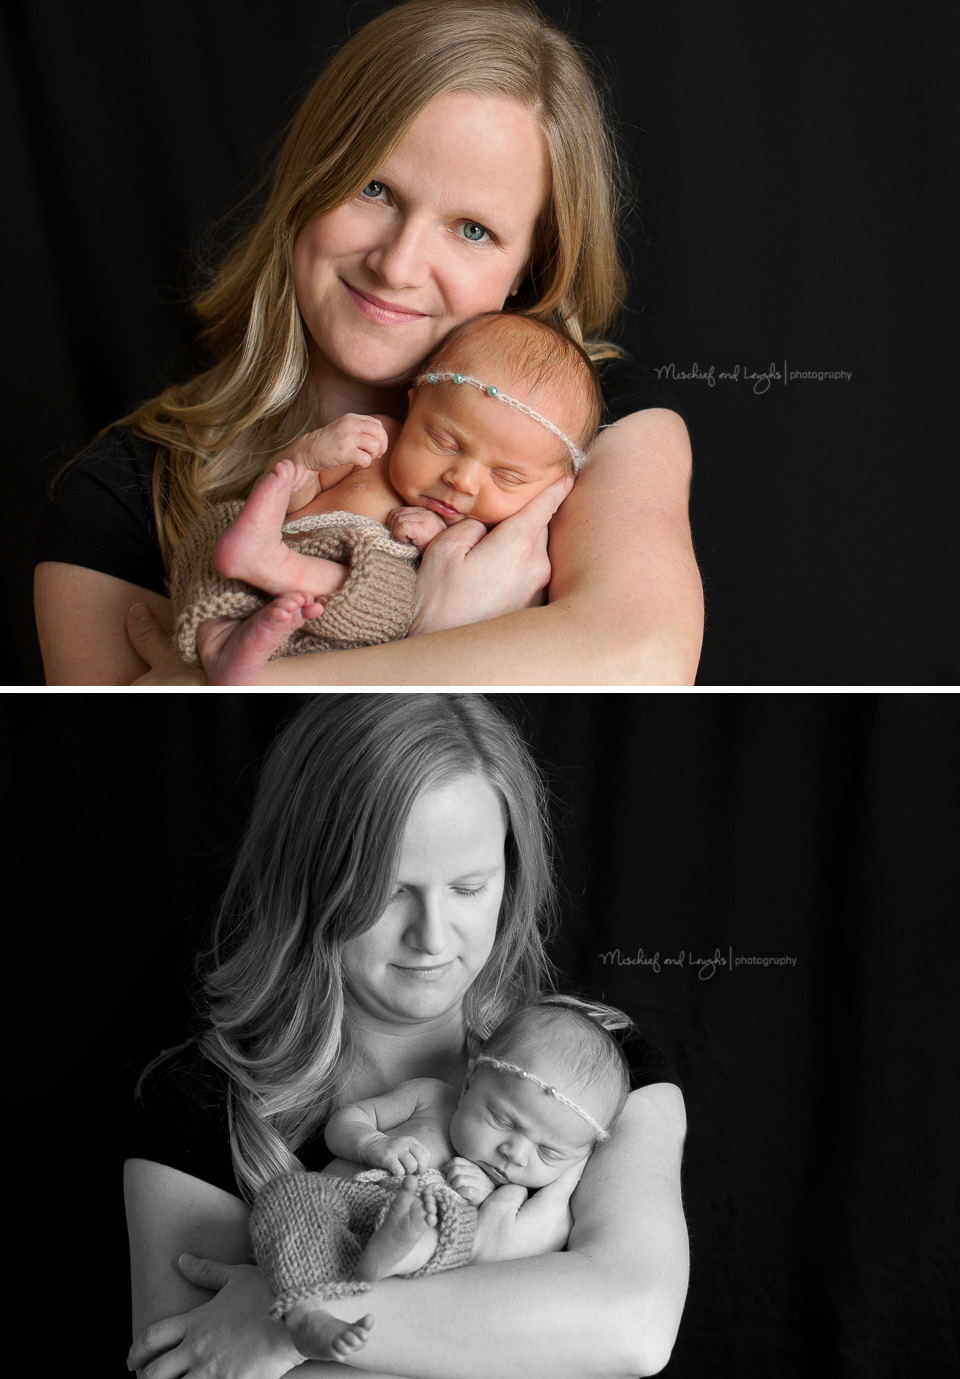 Mom and Newborn baby. Mischief and Laughs Photography, Cincinnati OH